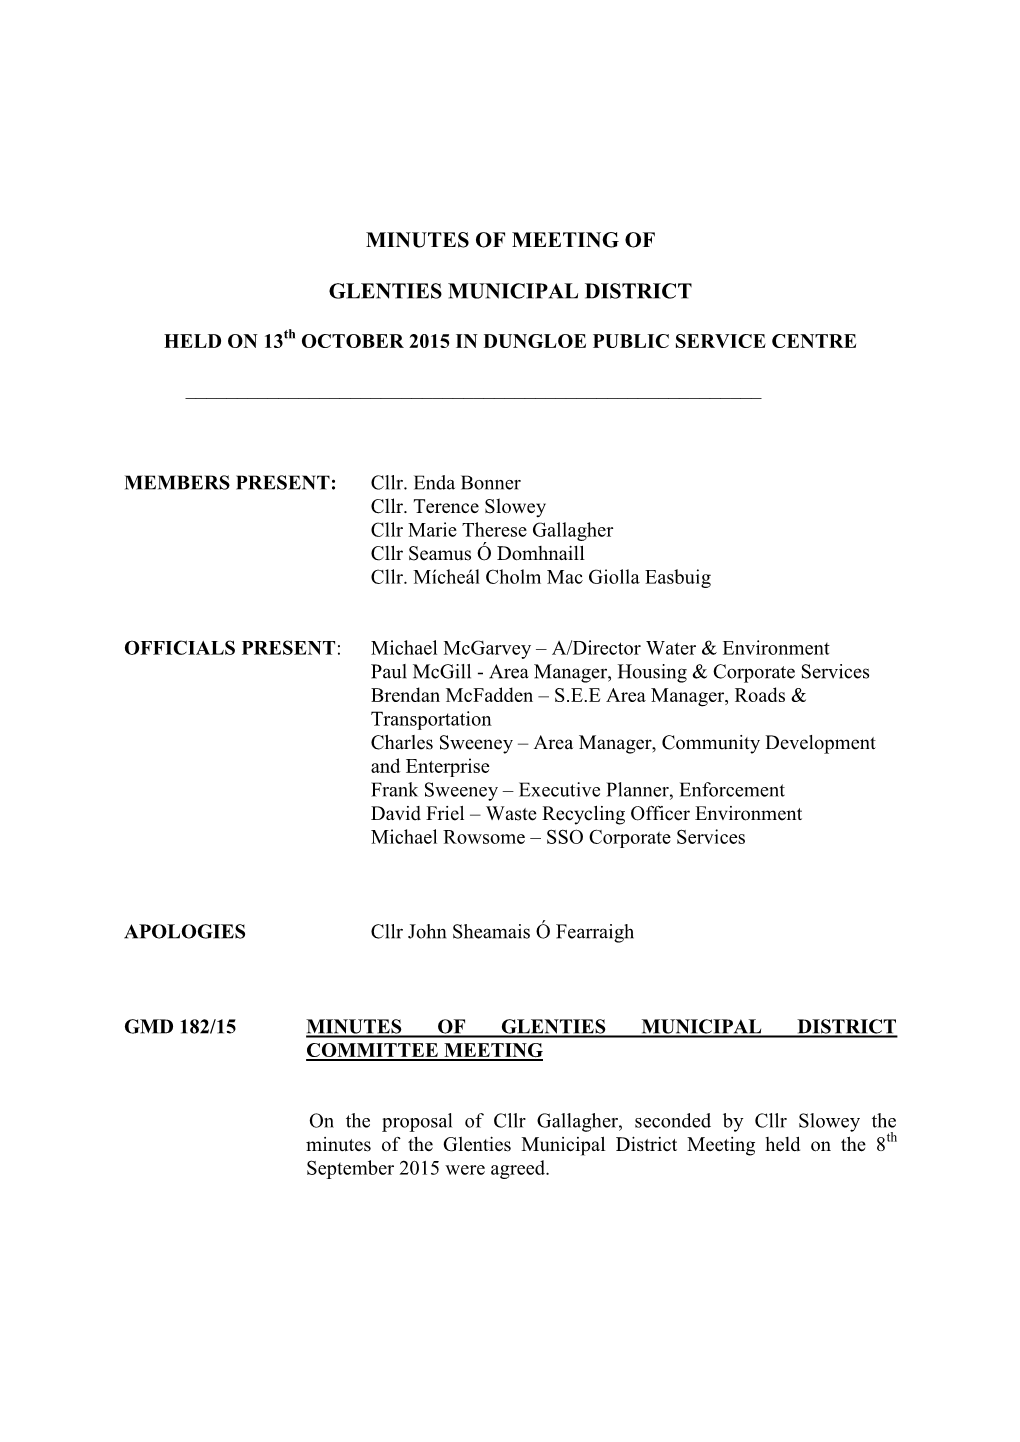 Minutes of Meeting of Glenties Municipal District